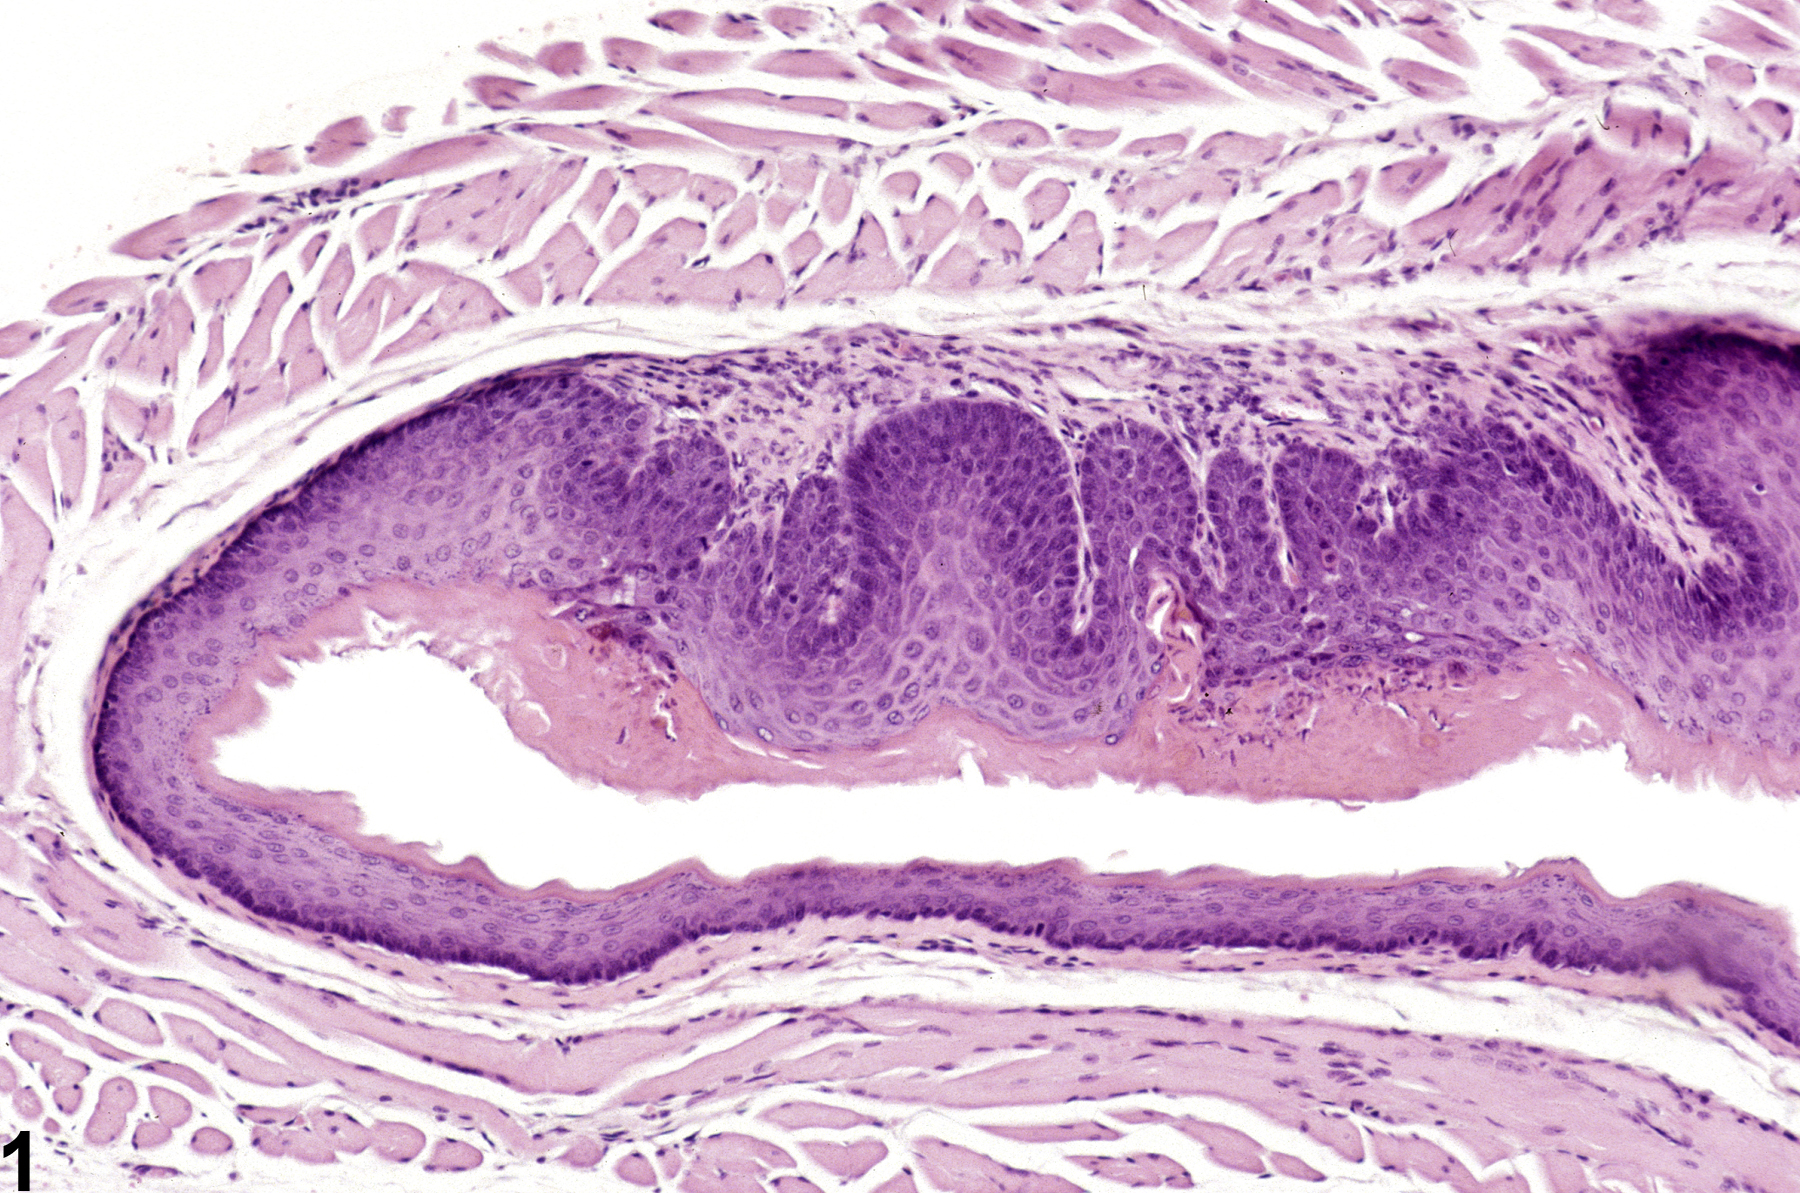 Image of hyperplasia in the esophagus from a female B6C3F1 mouse in a chronic study